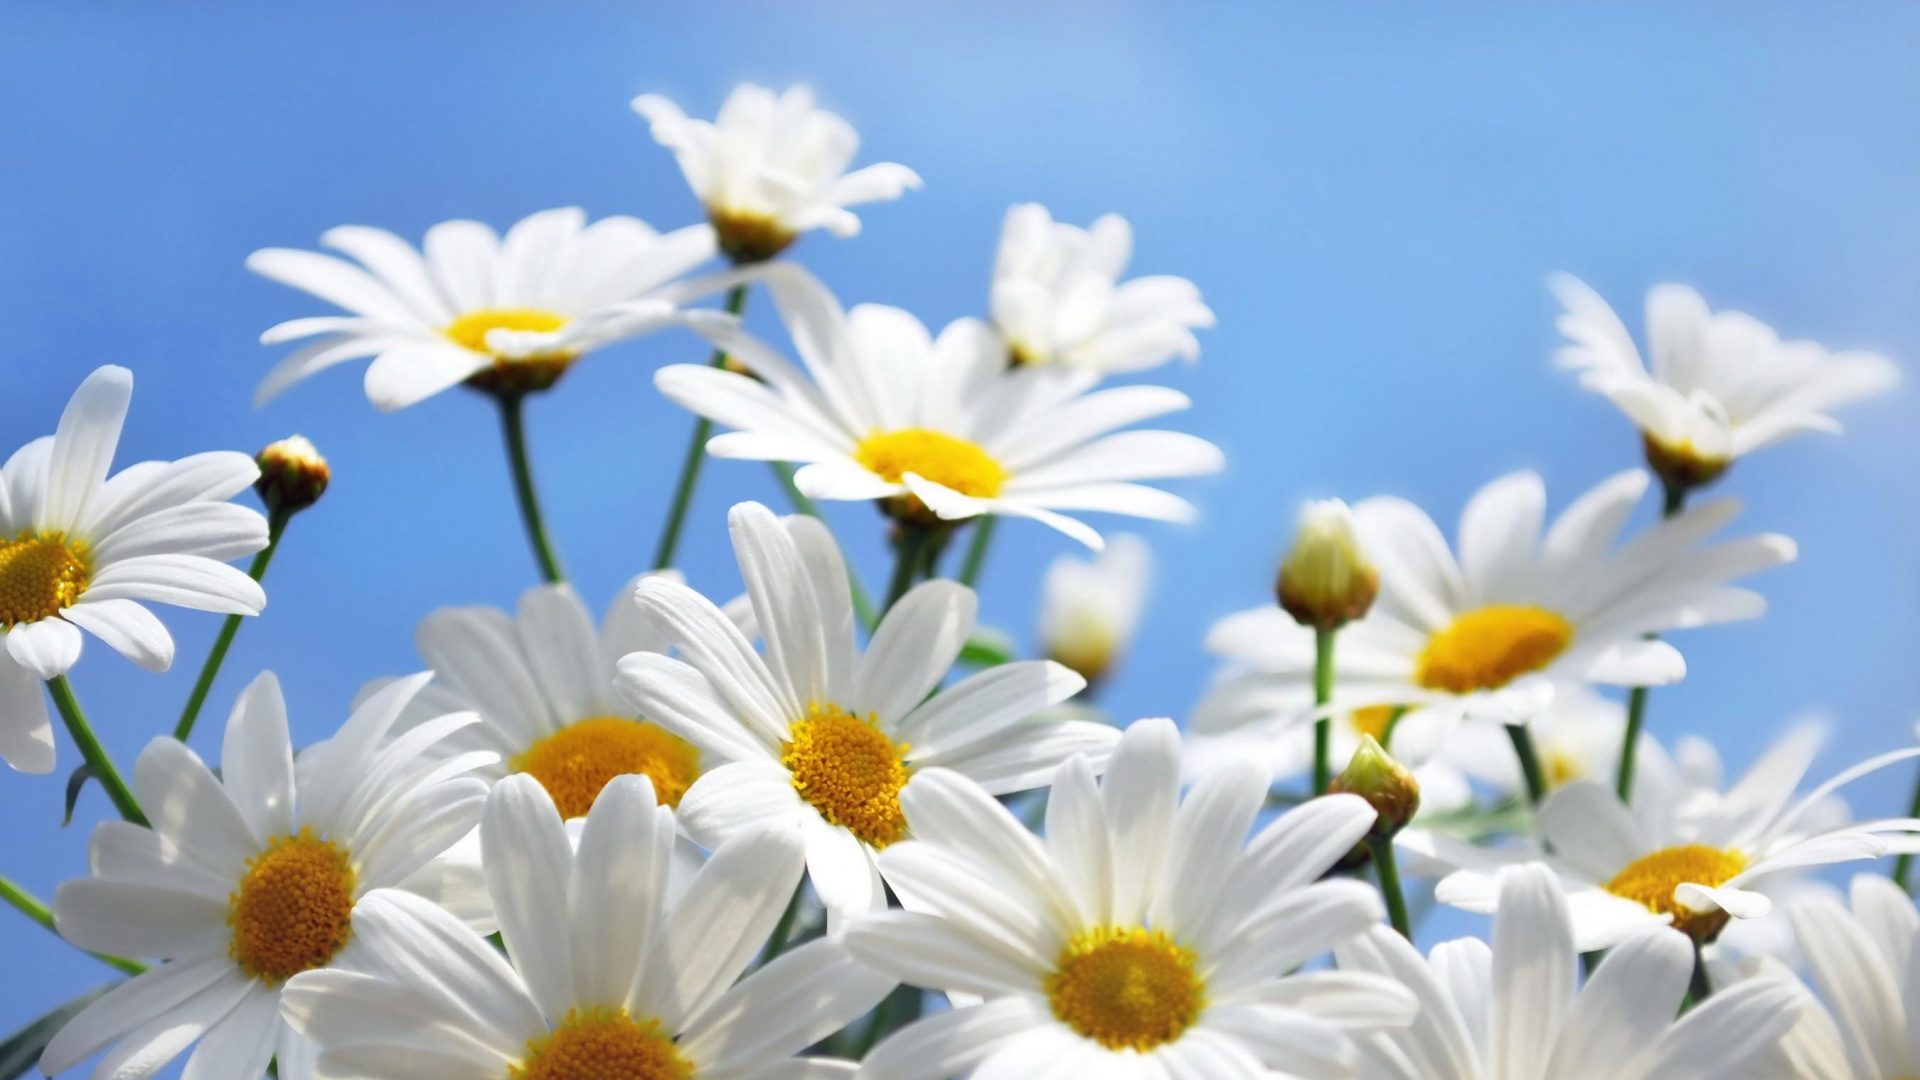 White and Yellow Daisy Flowers. Wallpaper in 1920x1080 Resolution